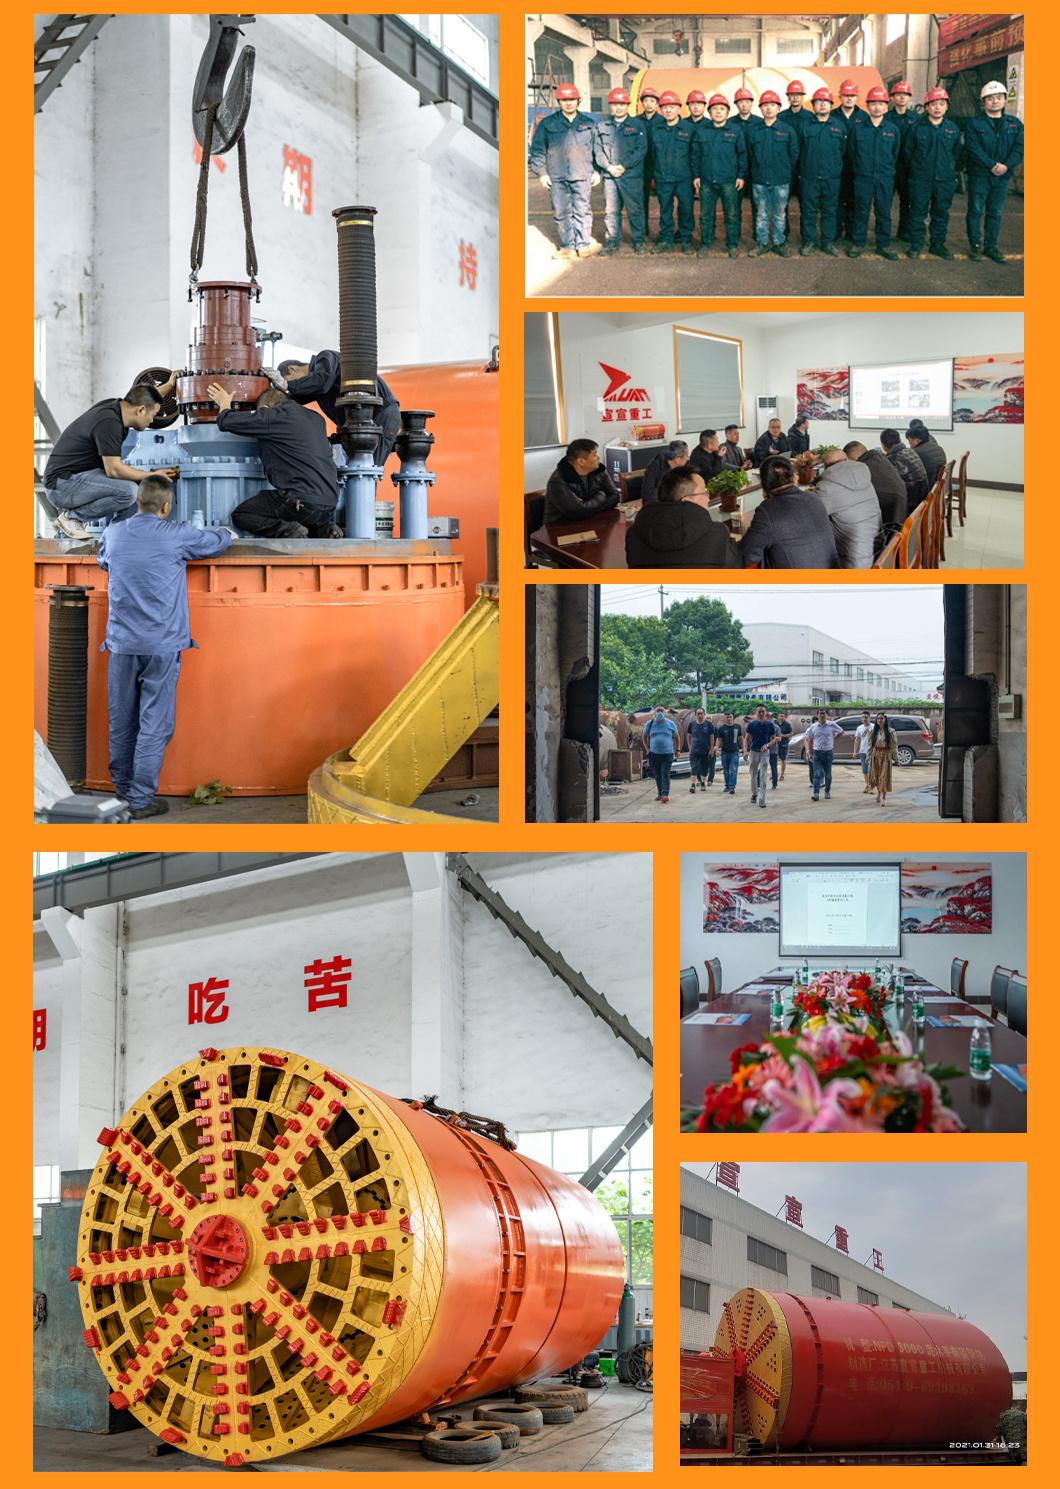 Top High Quality Trenchless Project Ysd3000 Rock Pipe Jacking Machine for Rcc